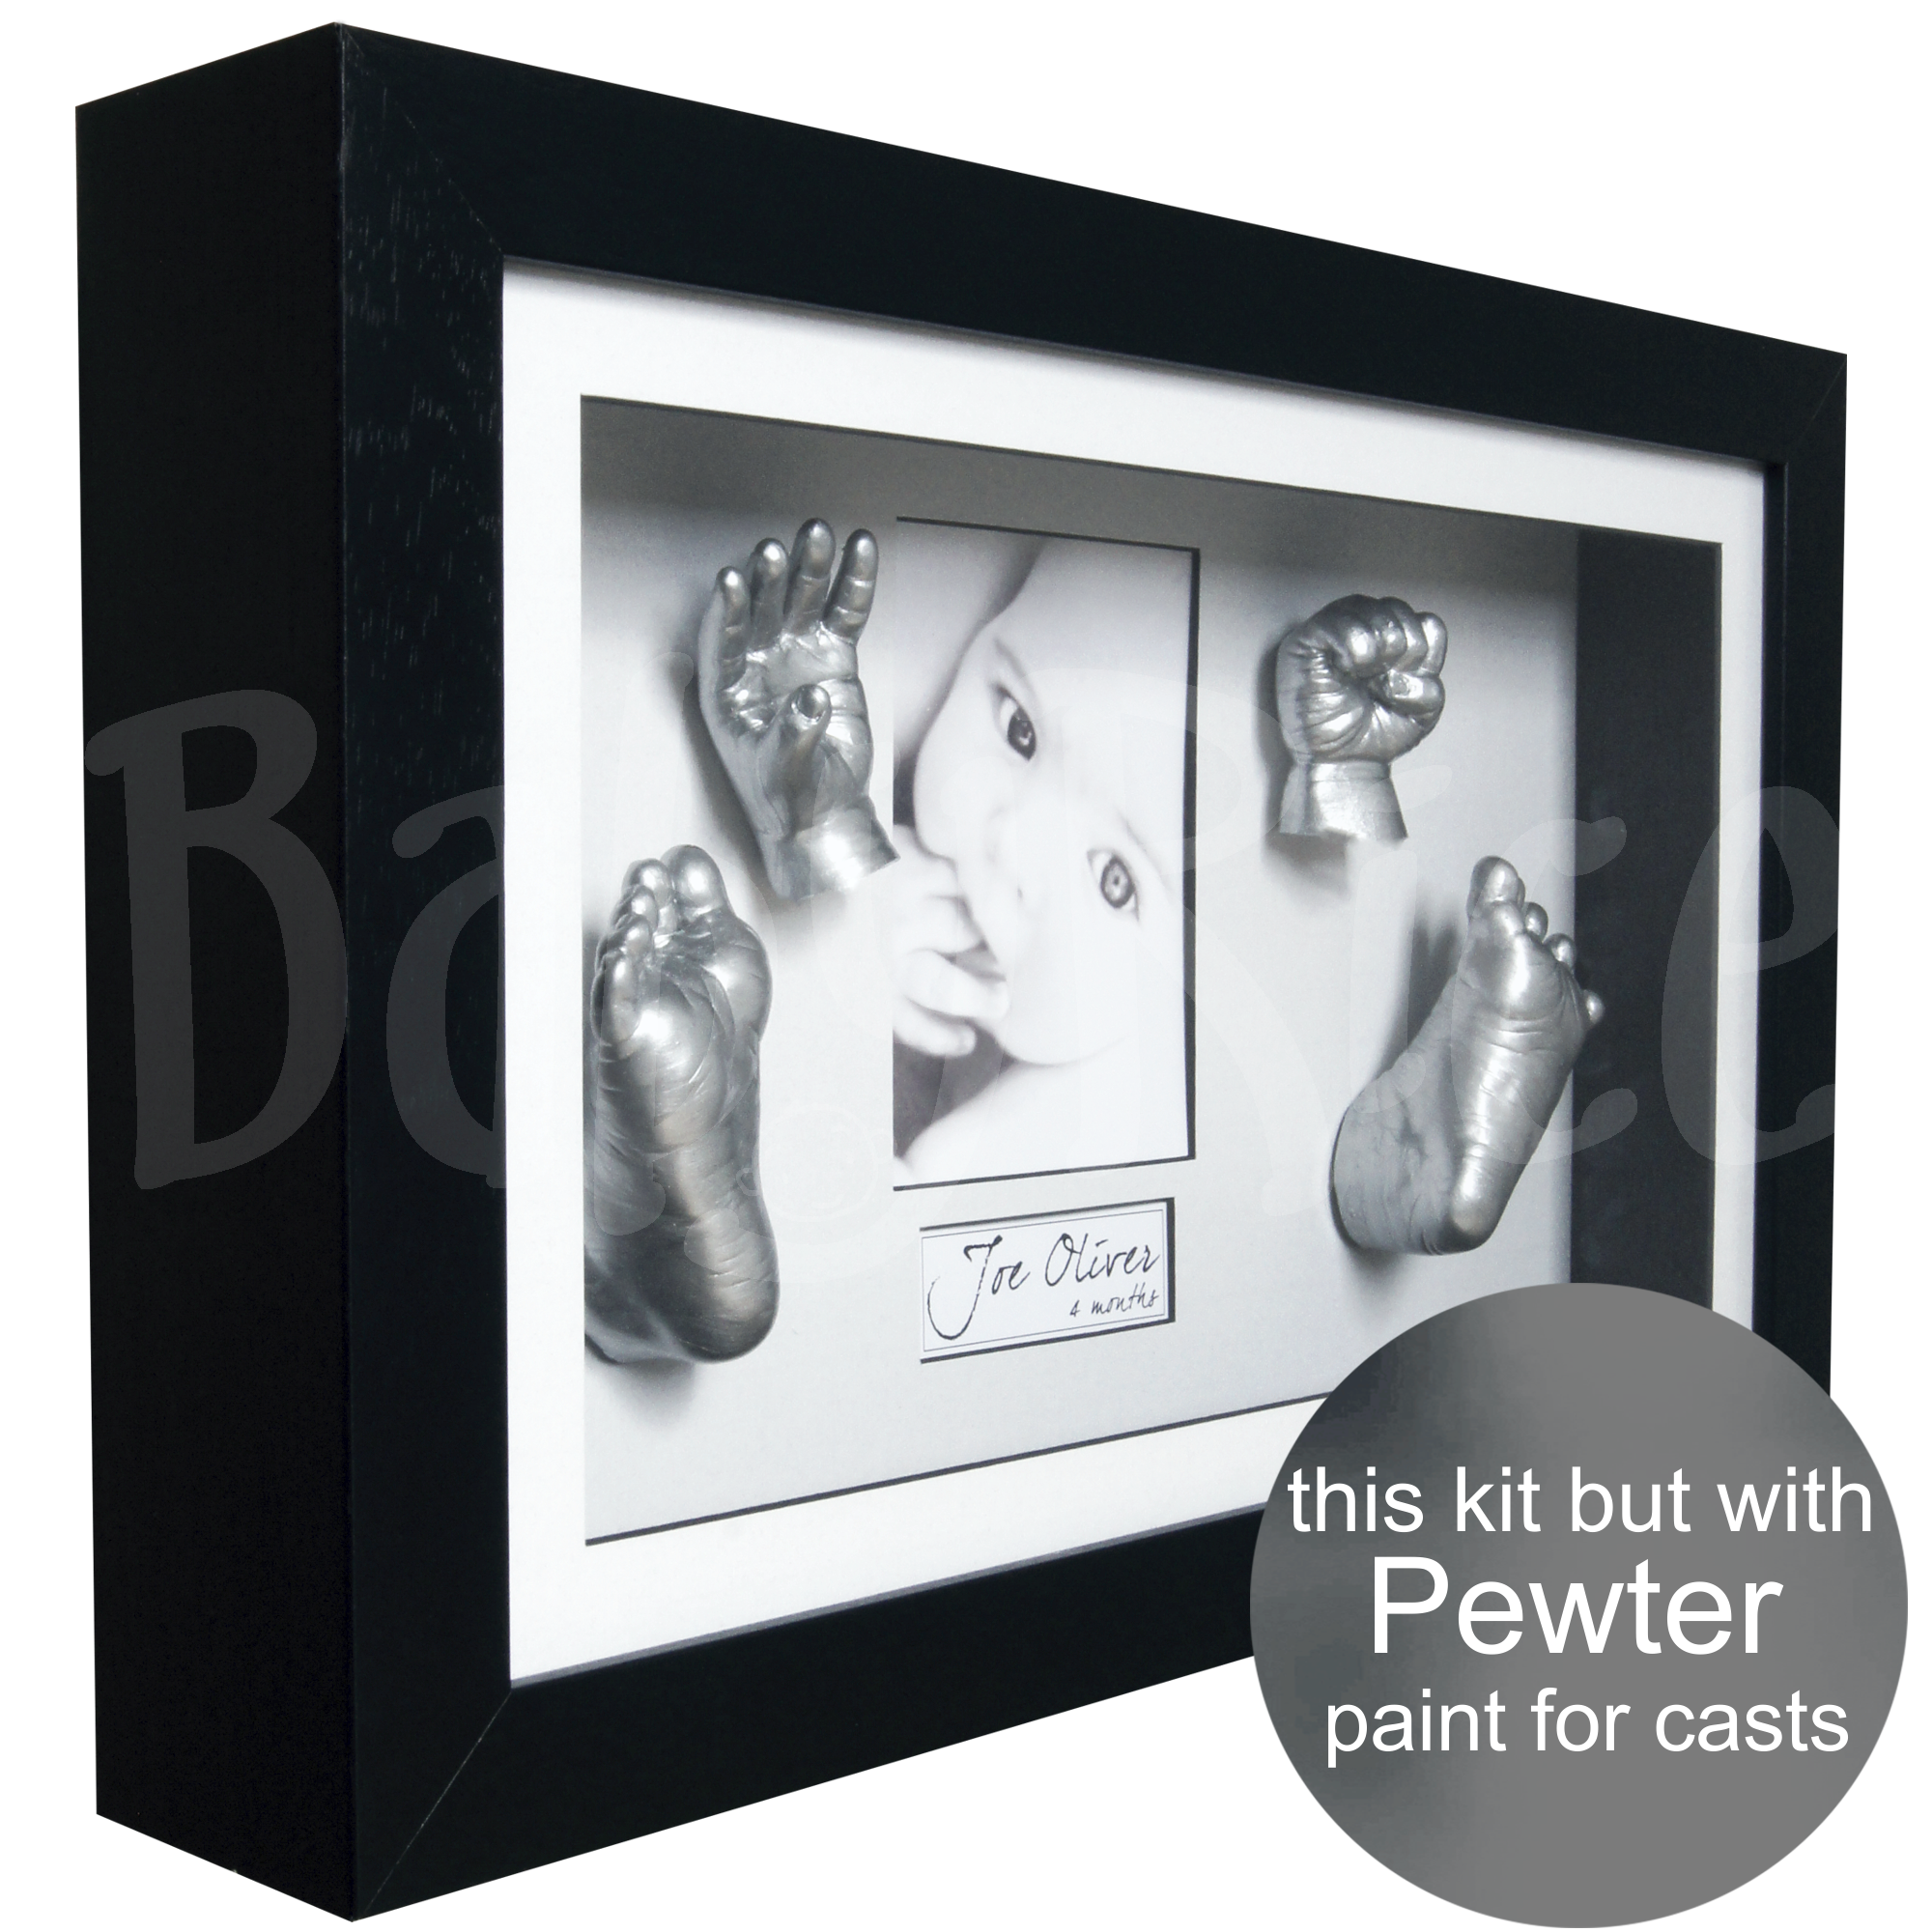 New baby keepsake gift 3D hands and feet casting kit with black frame, pewter paint